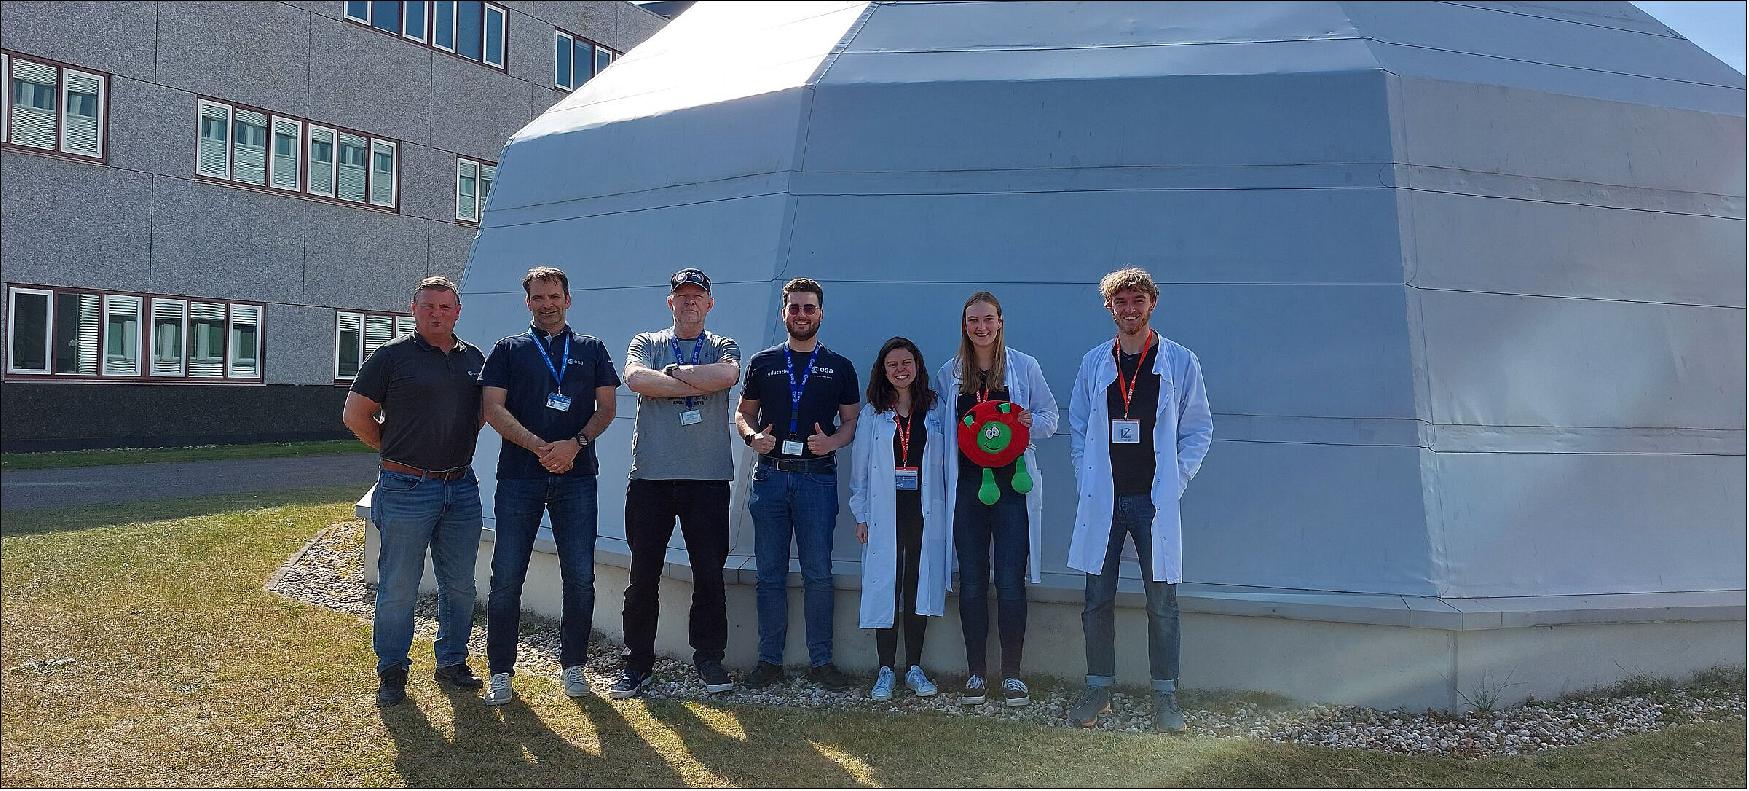 Figure 12: The experts and the students in front of the LDC dome (image credit: ESA)